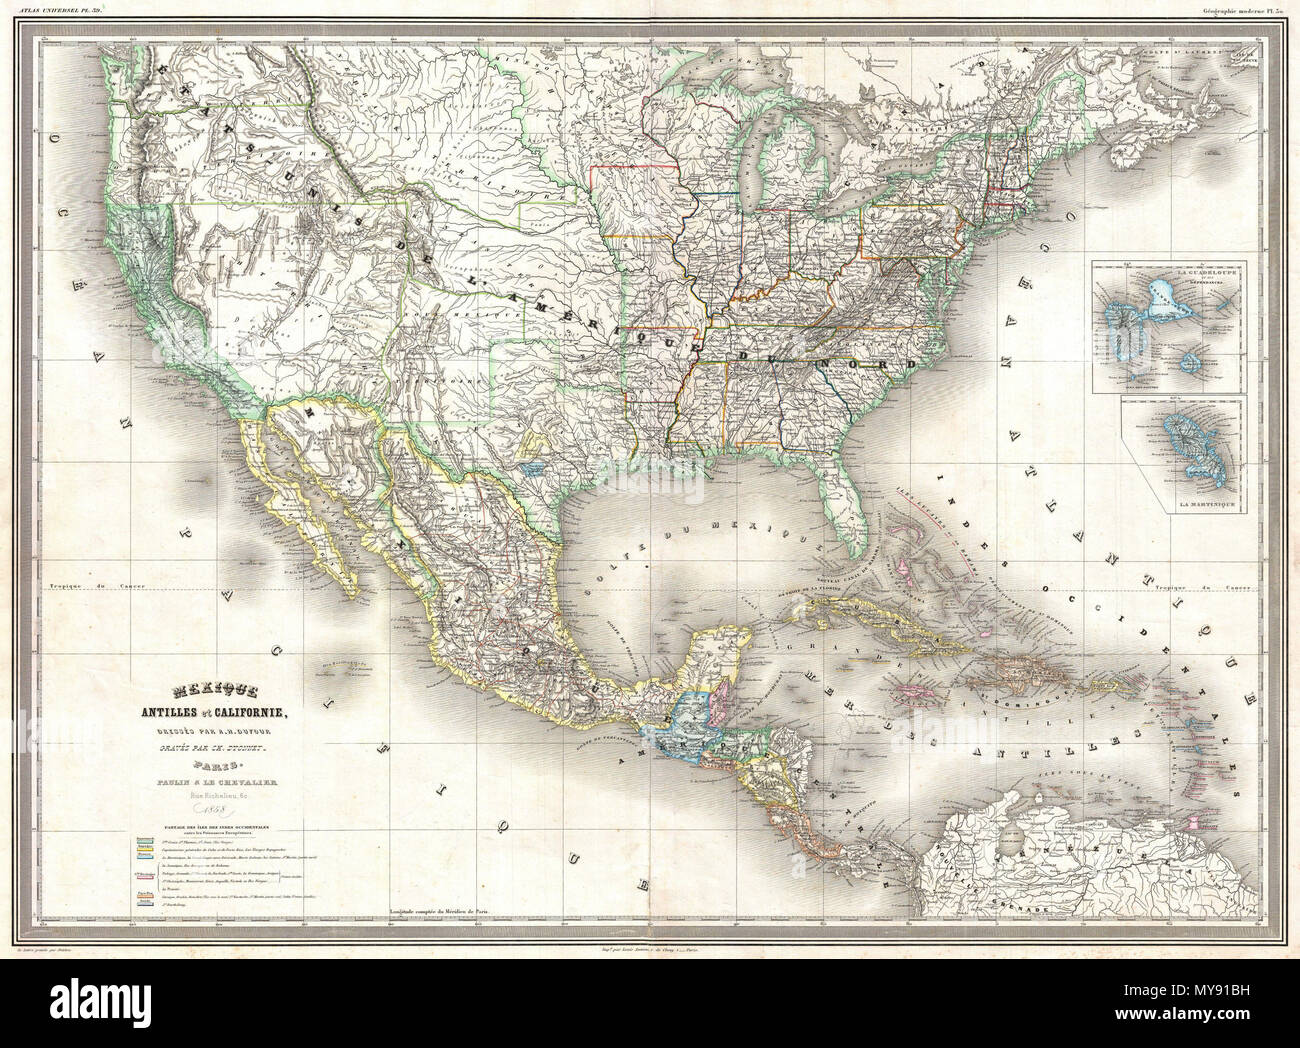 . Mexique Antilles et Californie .  English: A finely detailed large format 1858 map of the United States on Mercator's projection by the French cartographer A. H. Dufour. Convers the entirety of the United States during the brief period following the Gold Rush but before the outbreak of the American Civil War. The European influence of this map can be seen in the French (around San Antonio) and German (near Austin) colonies noted in Texas. Castroville appears as the major town in the Col. Française, which extends west to the Frio River. The Col. Allemande shows the Adelsverein's area between  Stock Photo